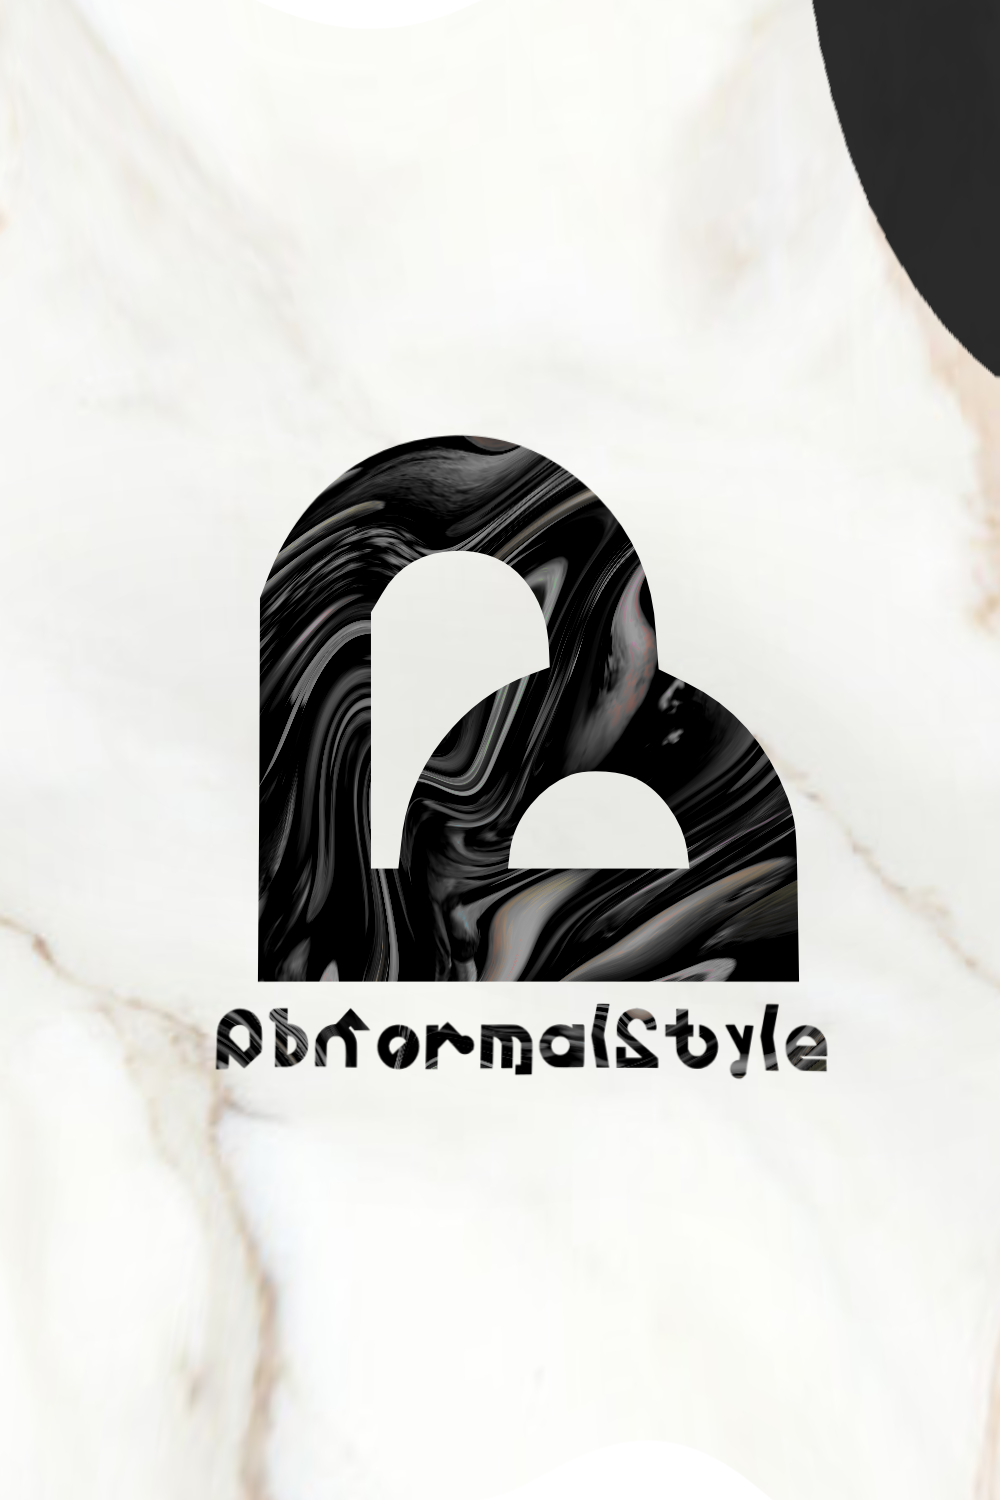 AbnormalStyle font pinterest preview image.